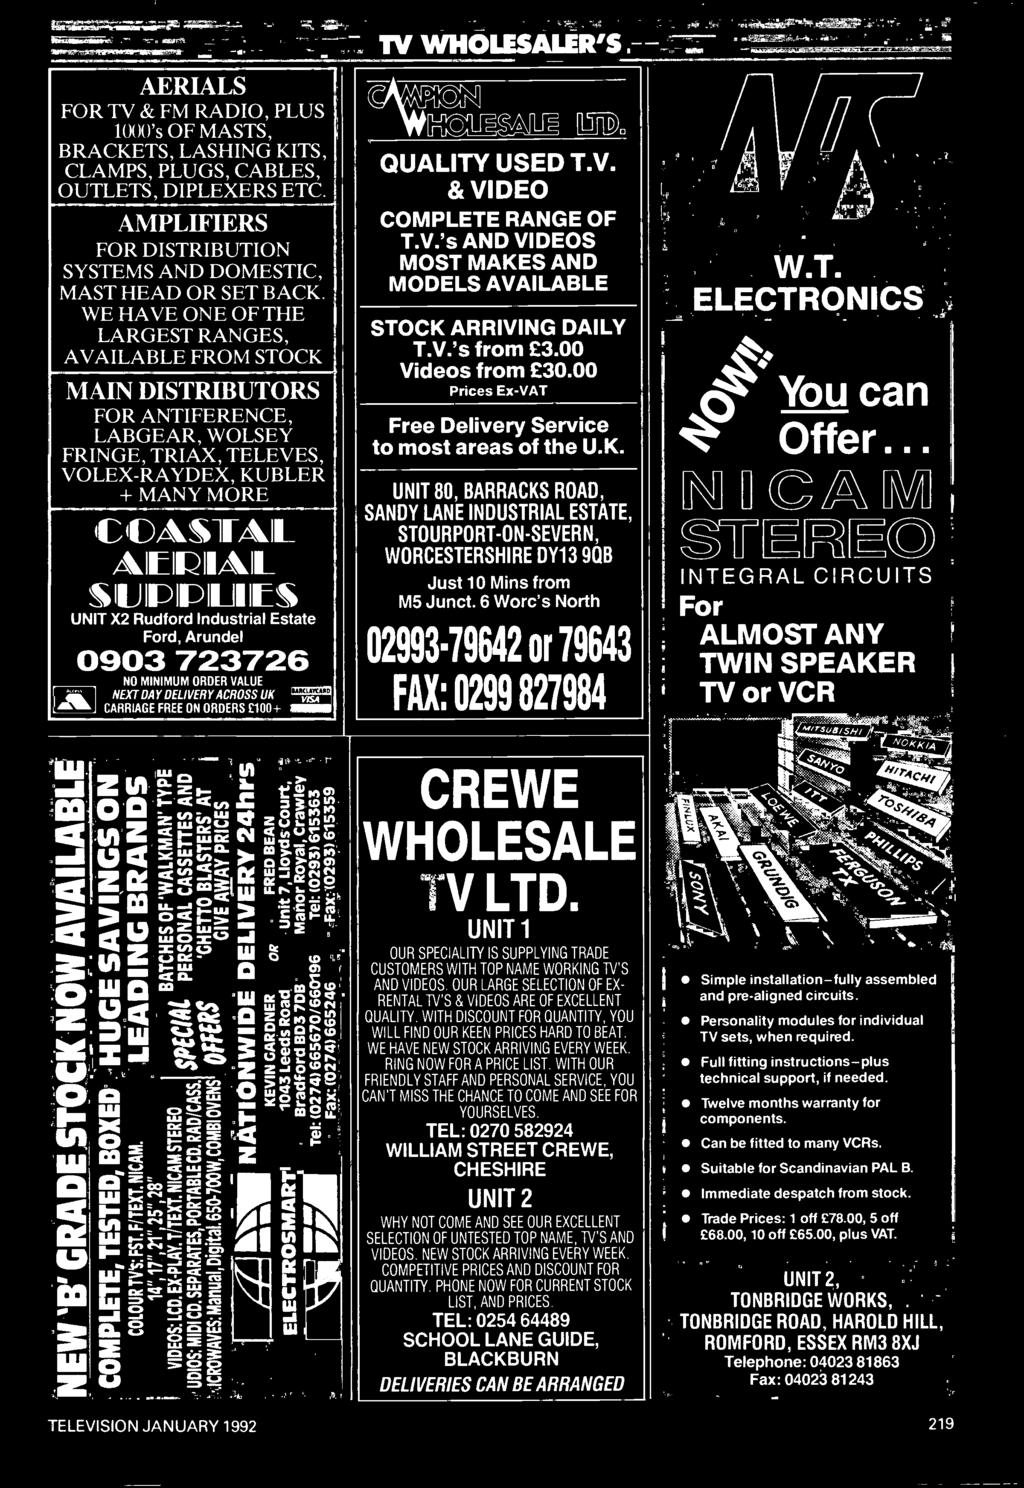 6 Worc's North 02993.79642 or 79643 FAX: 0299 827984 W.T. ELECTRONICS er You can Offer... czmu HL INTEGRAL CIRCUITS For ALMOST ANY TWIN SPEAKER TV or VCR CREWE WHOLESALE TV LTD.